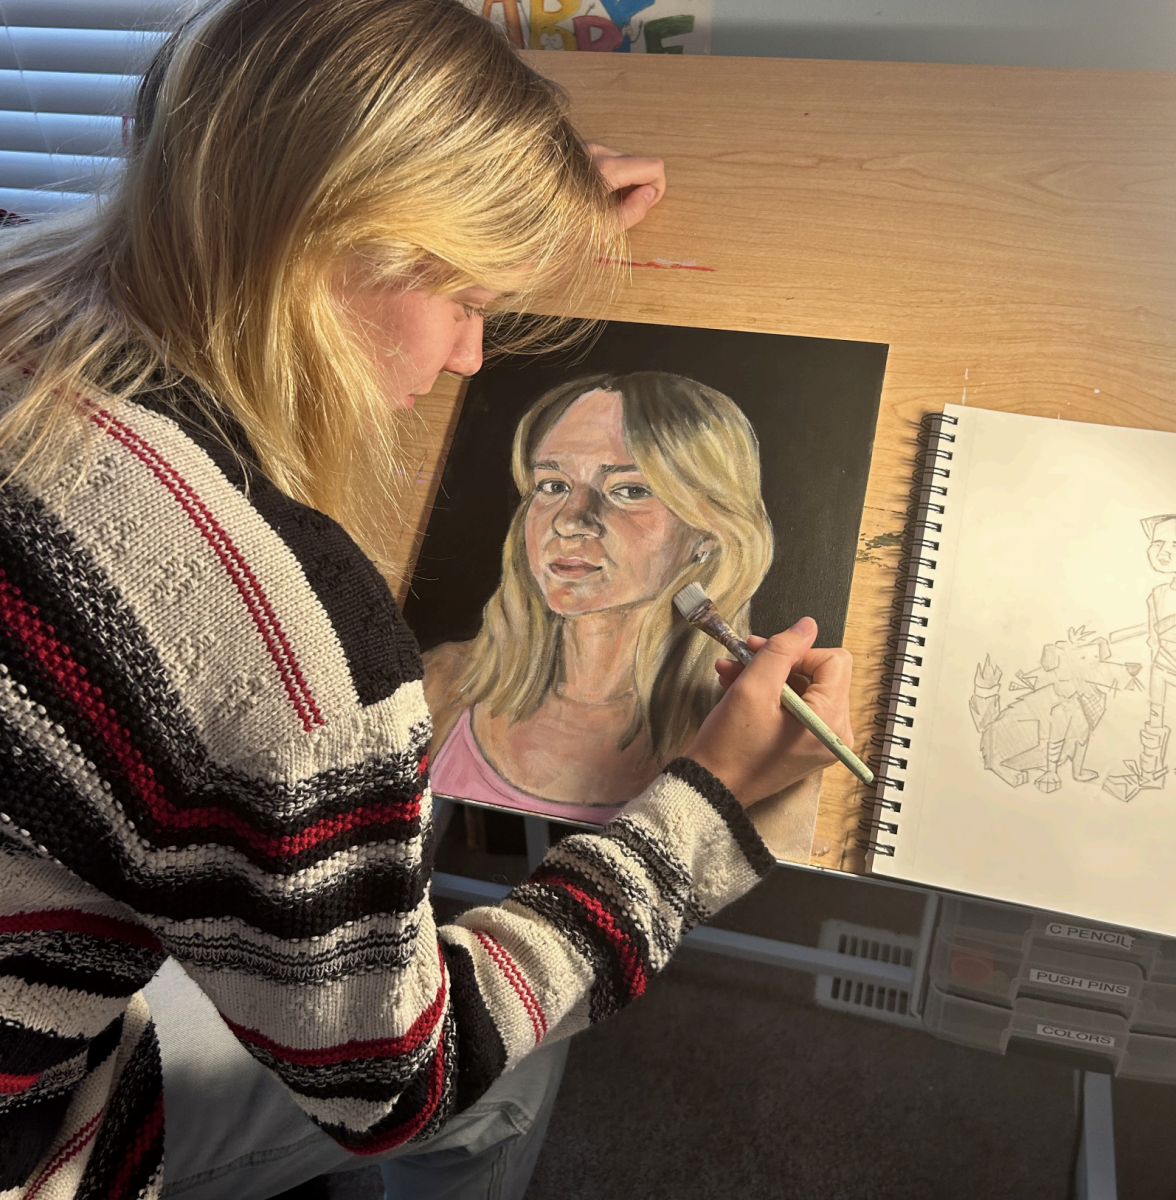 Senior Abby Fitts adds finishing touches to one of her many self-portraits. Fitts uses her self-portraits as outlet for her emotions.